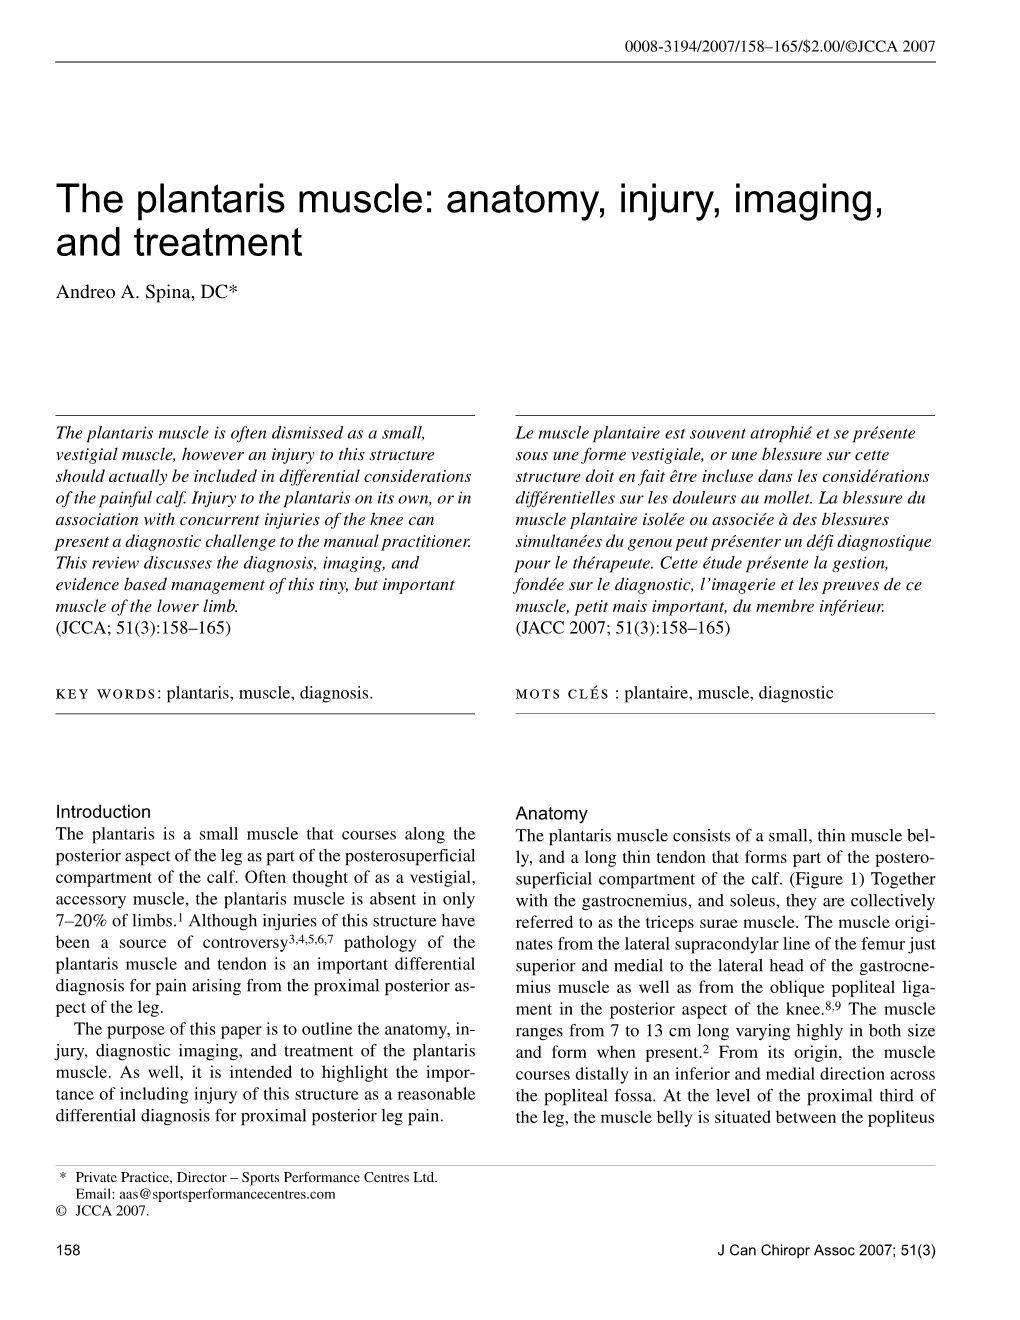 The Plantaris Muscle: Anatomy, Injury, Imaging, and Treatment Andreo A